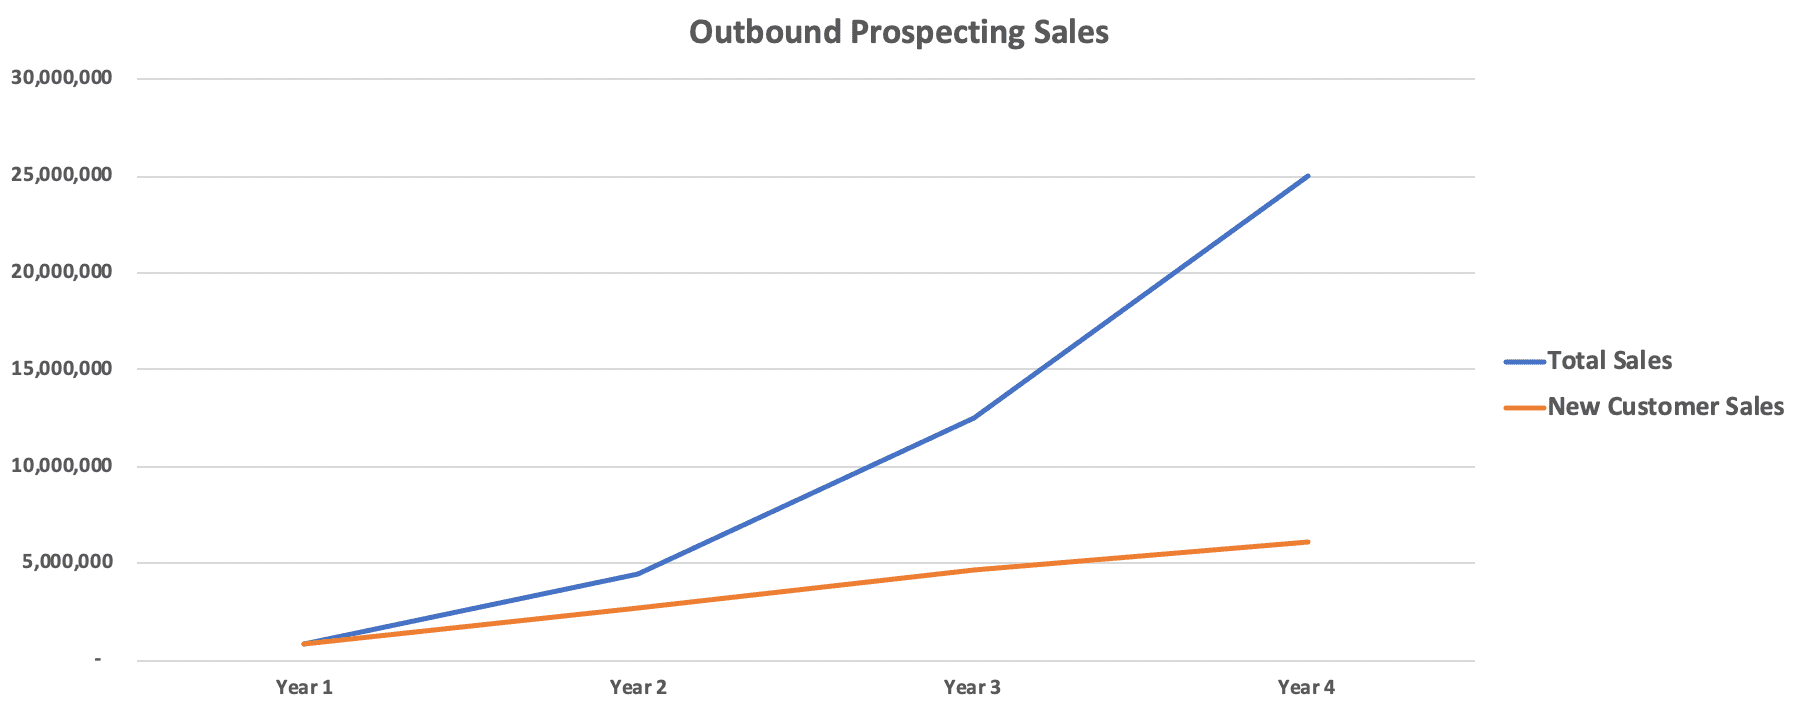 Outbound Prospecting Sales